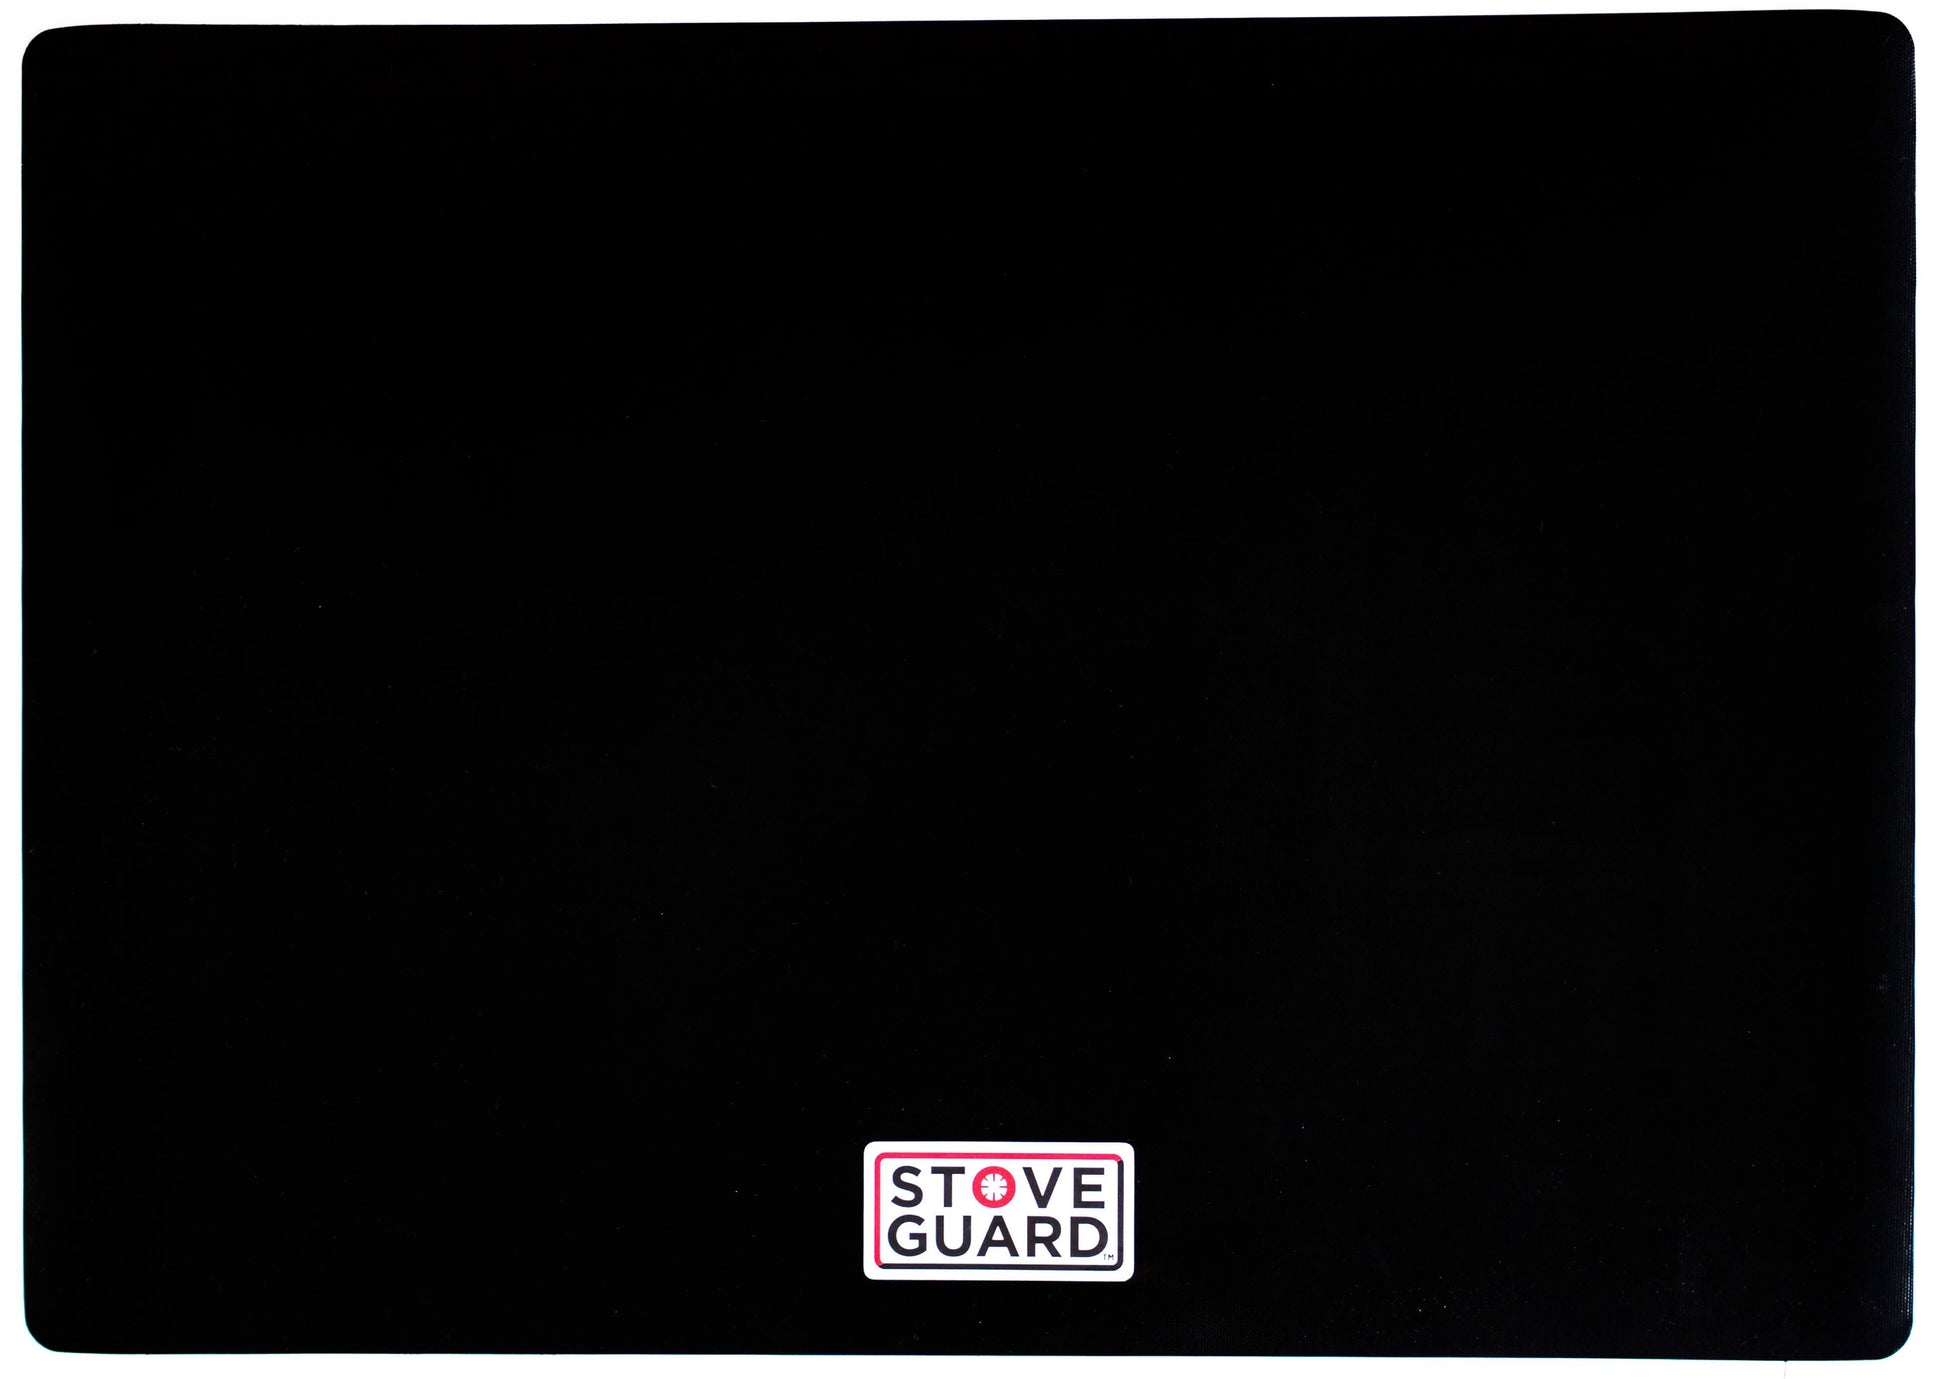 OvenGuard by Golden Protective Services Oven Guard, 15 Black Oven